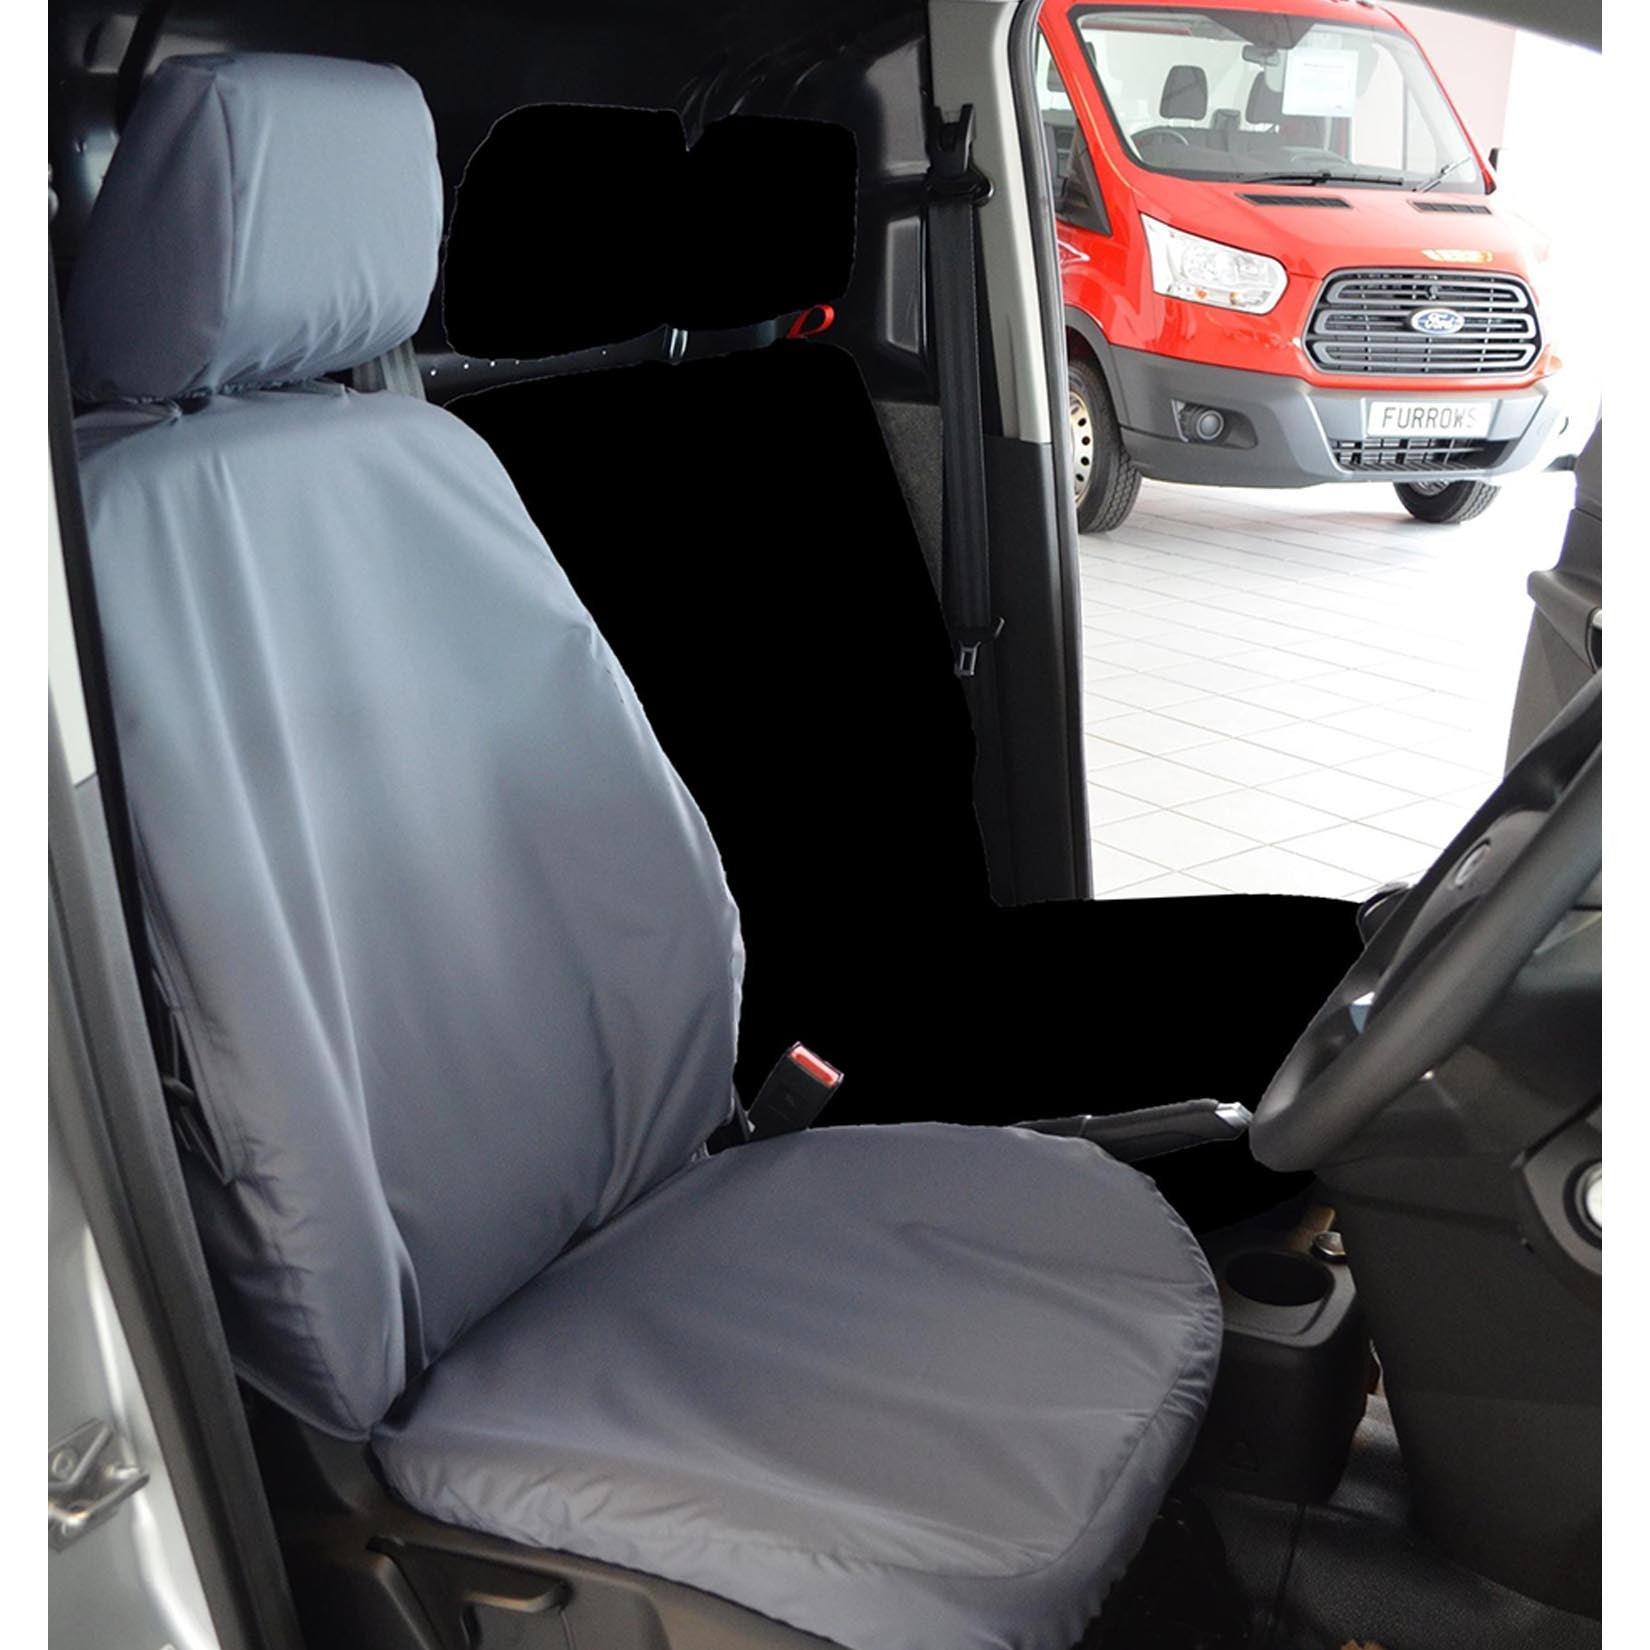 FORD TRANSIT CONNECT VAN 2014-2018 DRIVER'S SEAT COVER - GREY - Storm Xccessories2